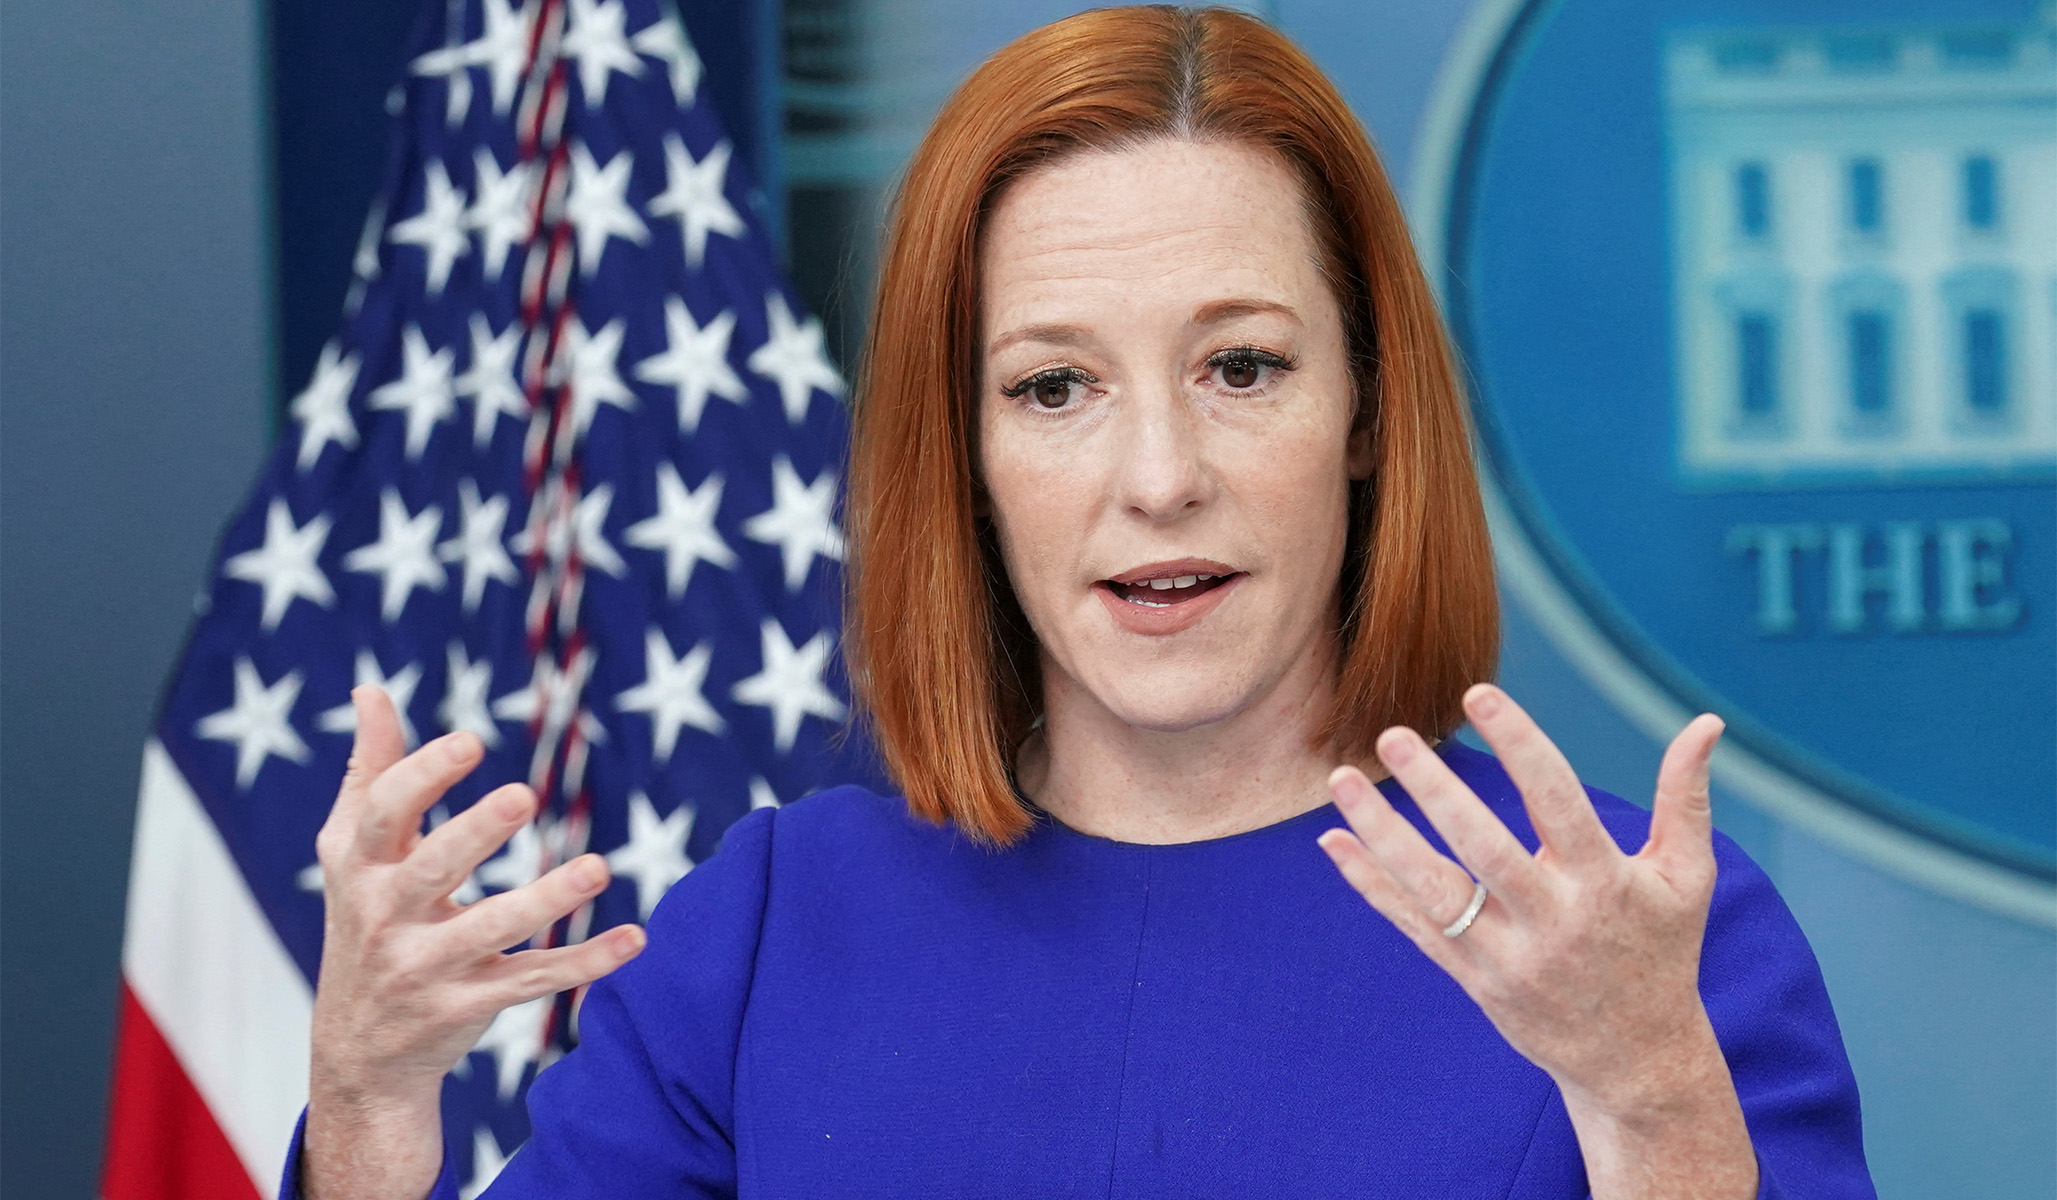 Nation S Largest Police Advocacy Org Accuses Psaki Of Laughing Off Americans Crime Concerns National Review